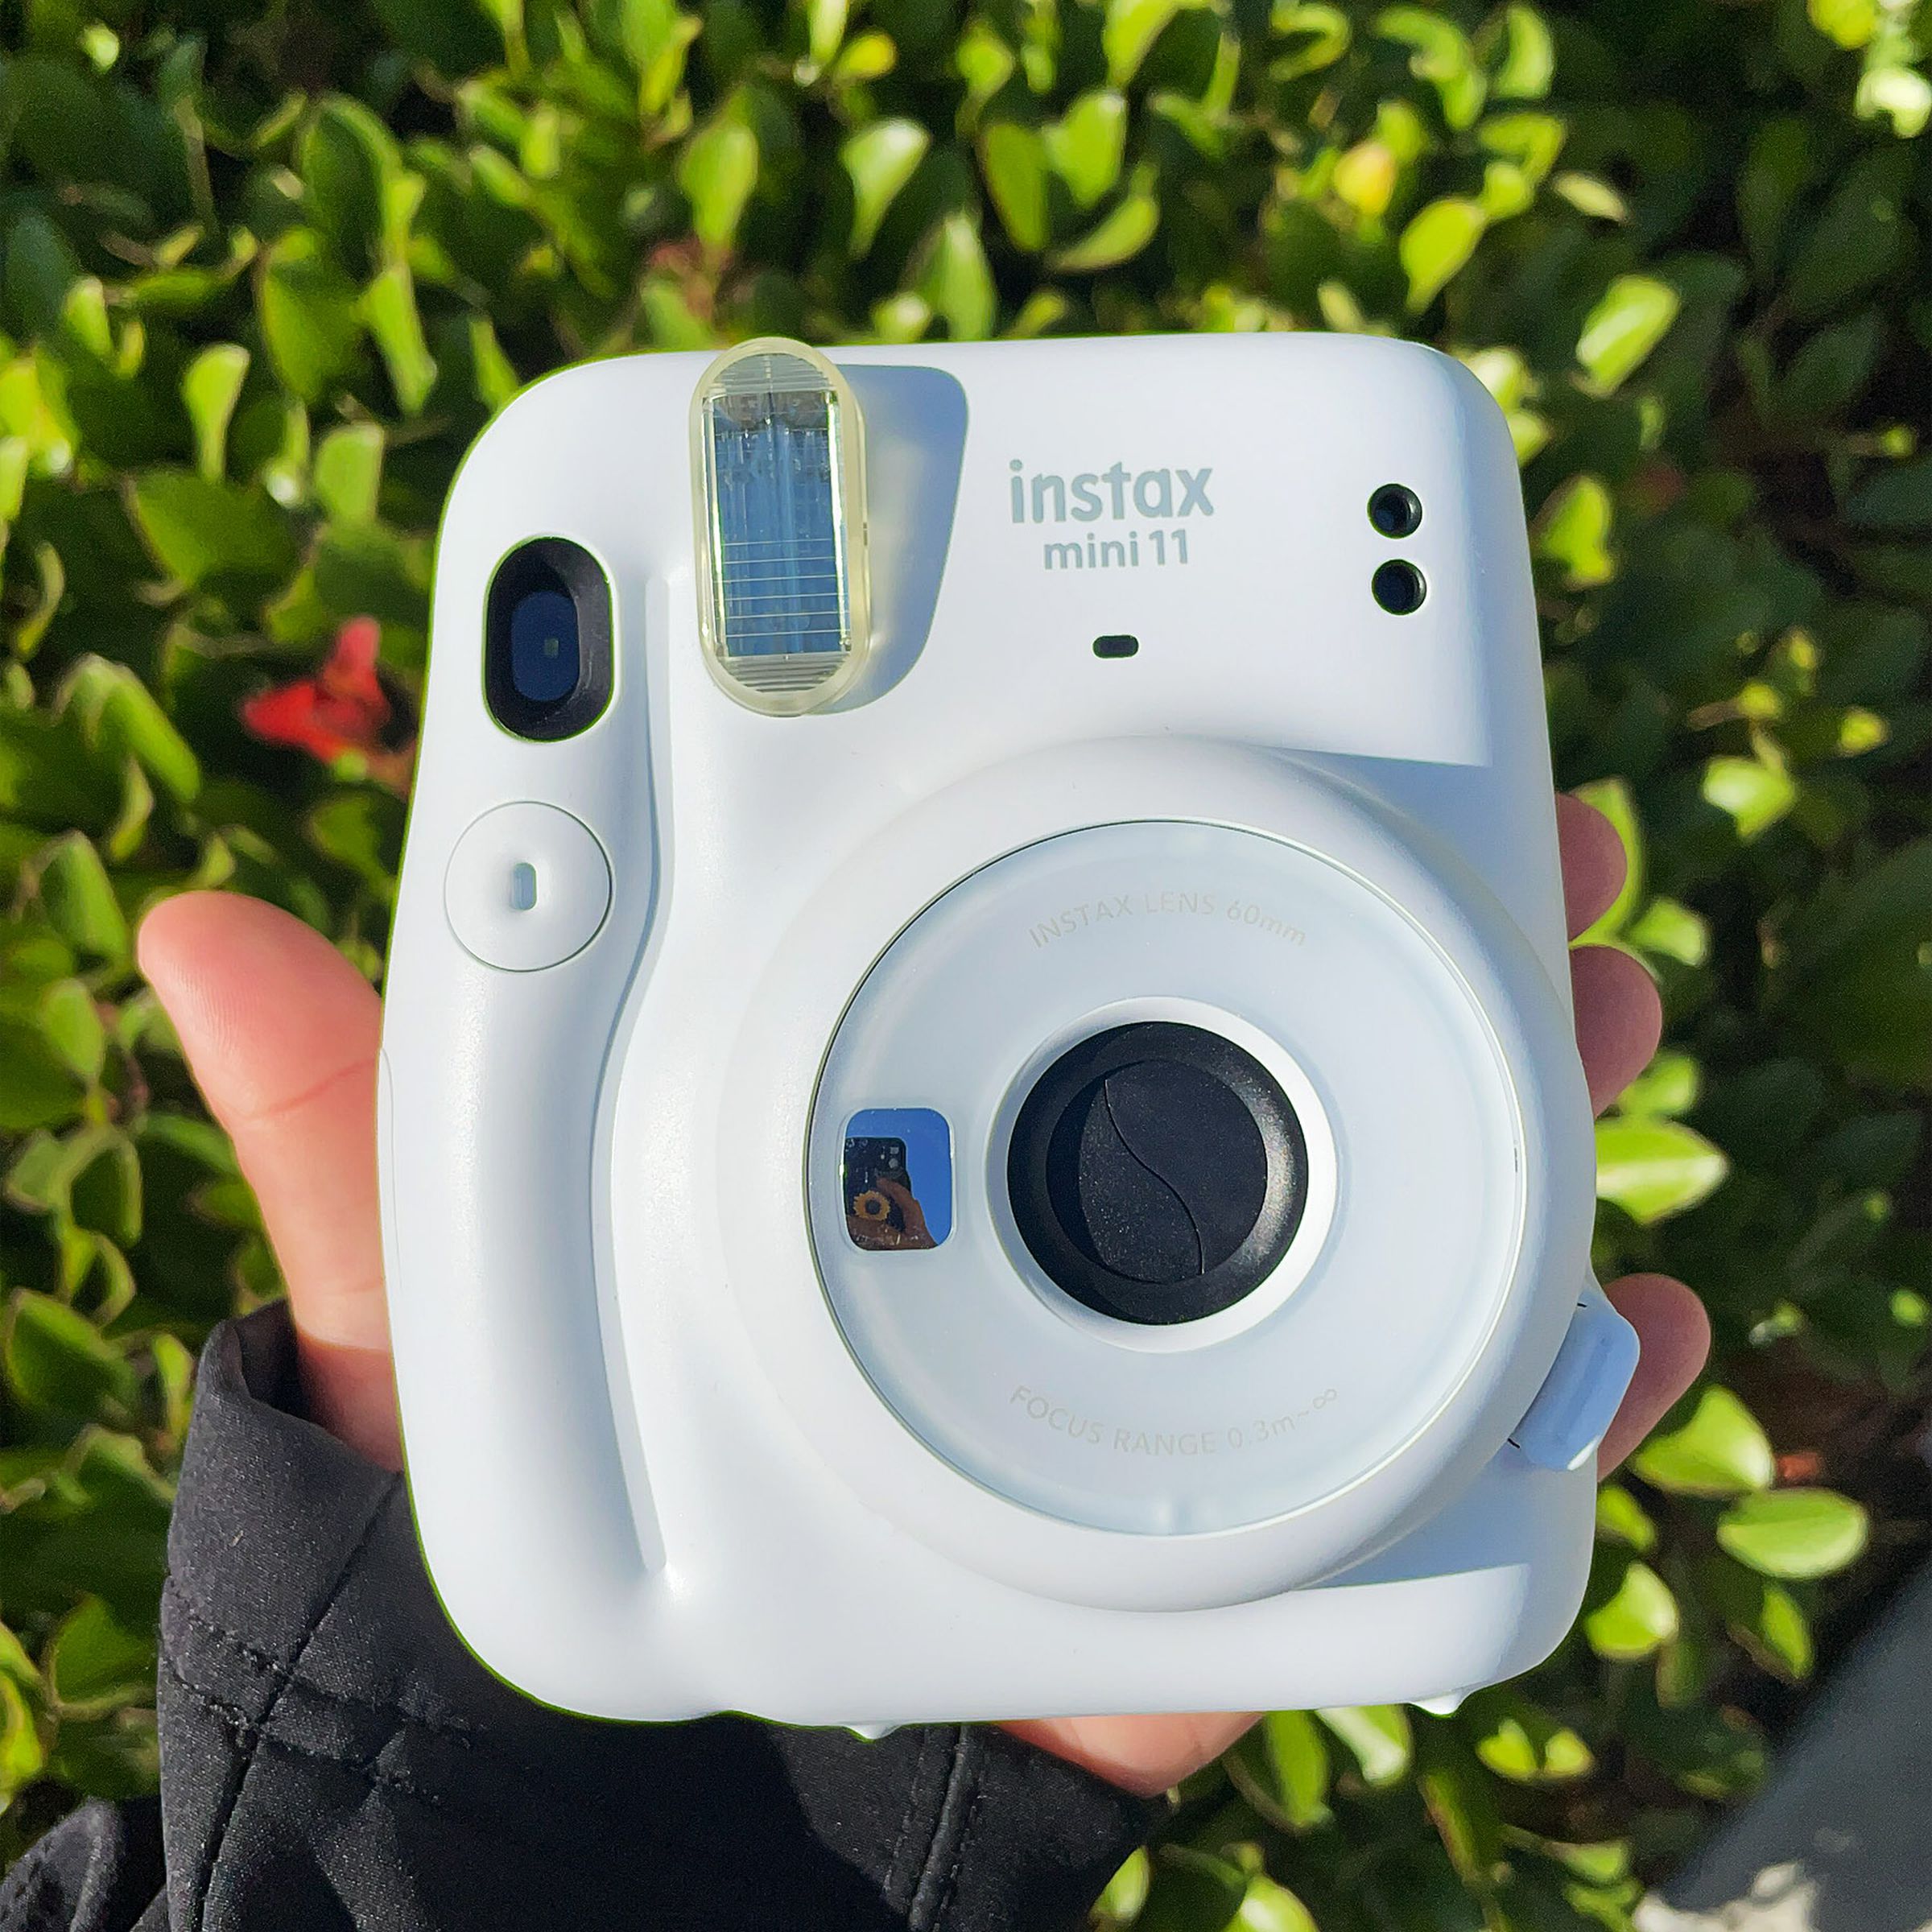 A hand holding Fujifilm’s white Instax Mini 11 instant camera in front of a bush outside.